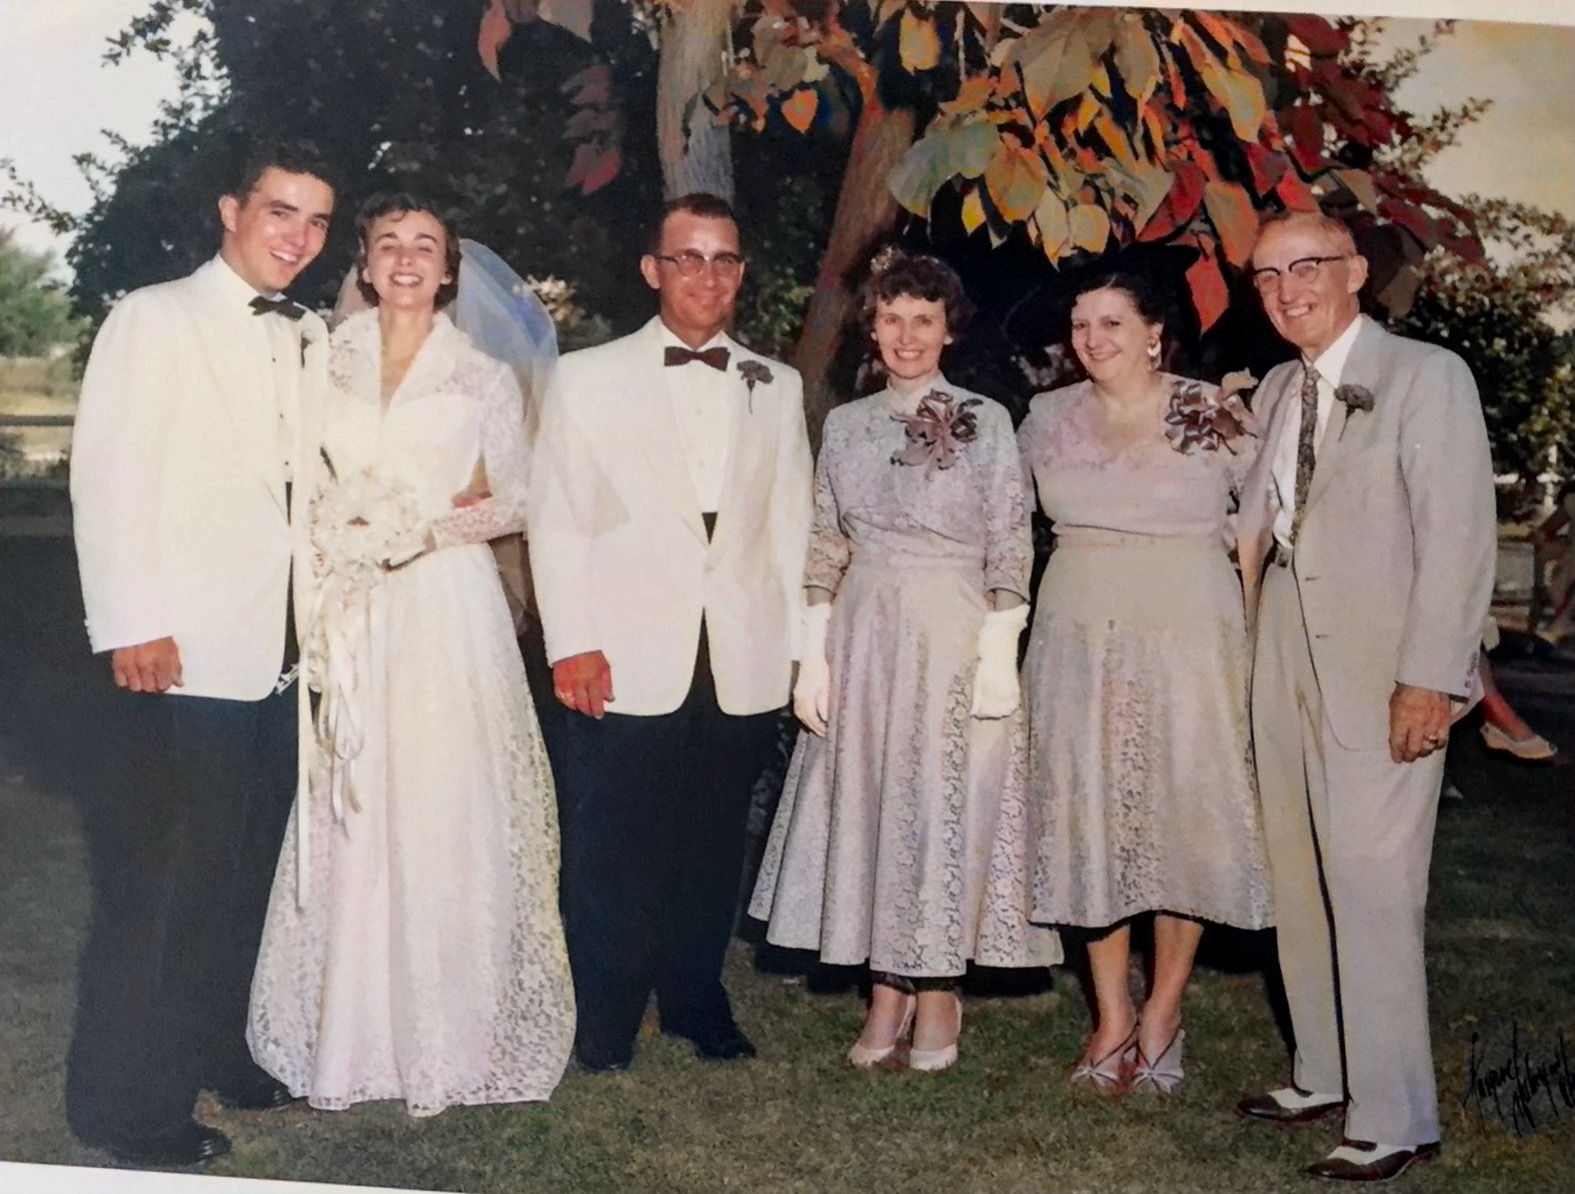 August 7, 1954, both sets of grandparents at my parents wedding. My grandmother in the gloves died 10 days after this picture was taken and my  granfather, the far right dird one year after this photo.  The  grandmother left  was my hero, the  grandmother I try to be. Sadly the bride also died too soon at age 47